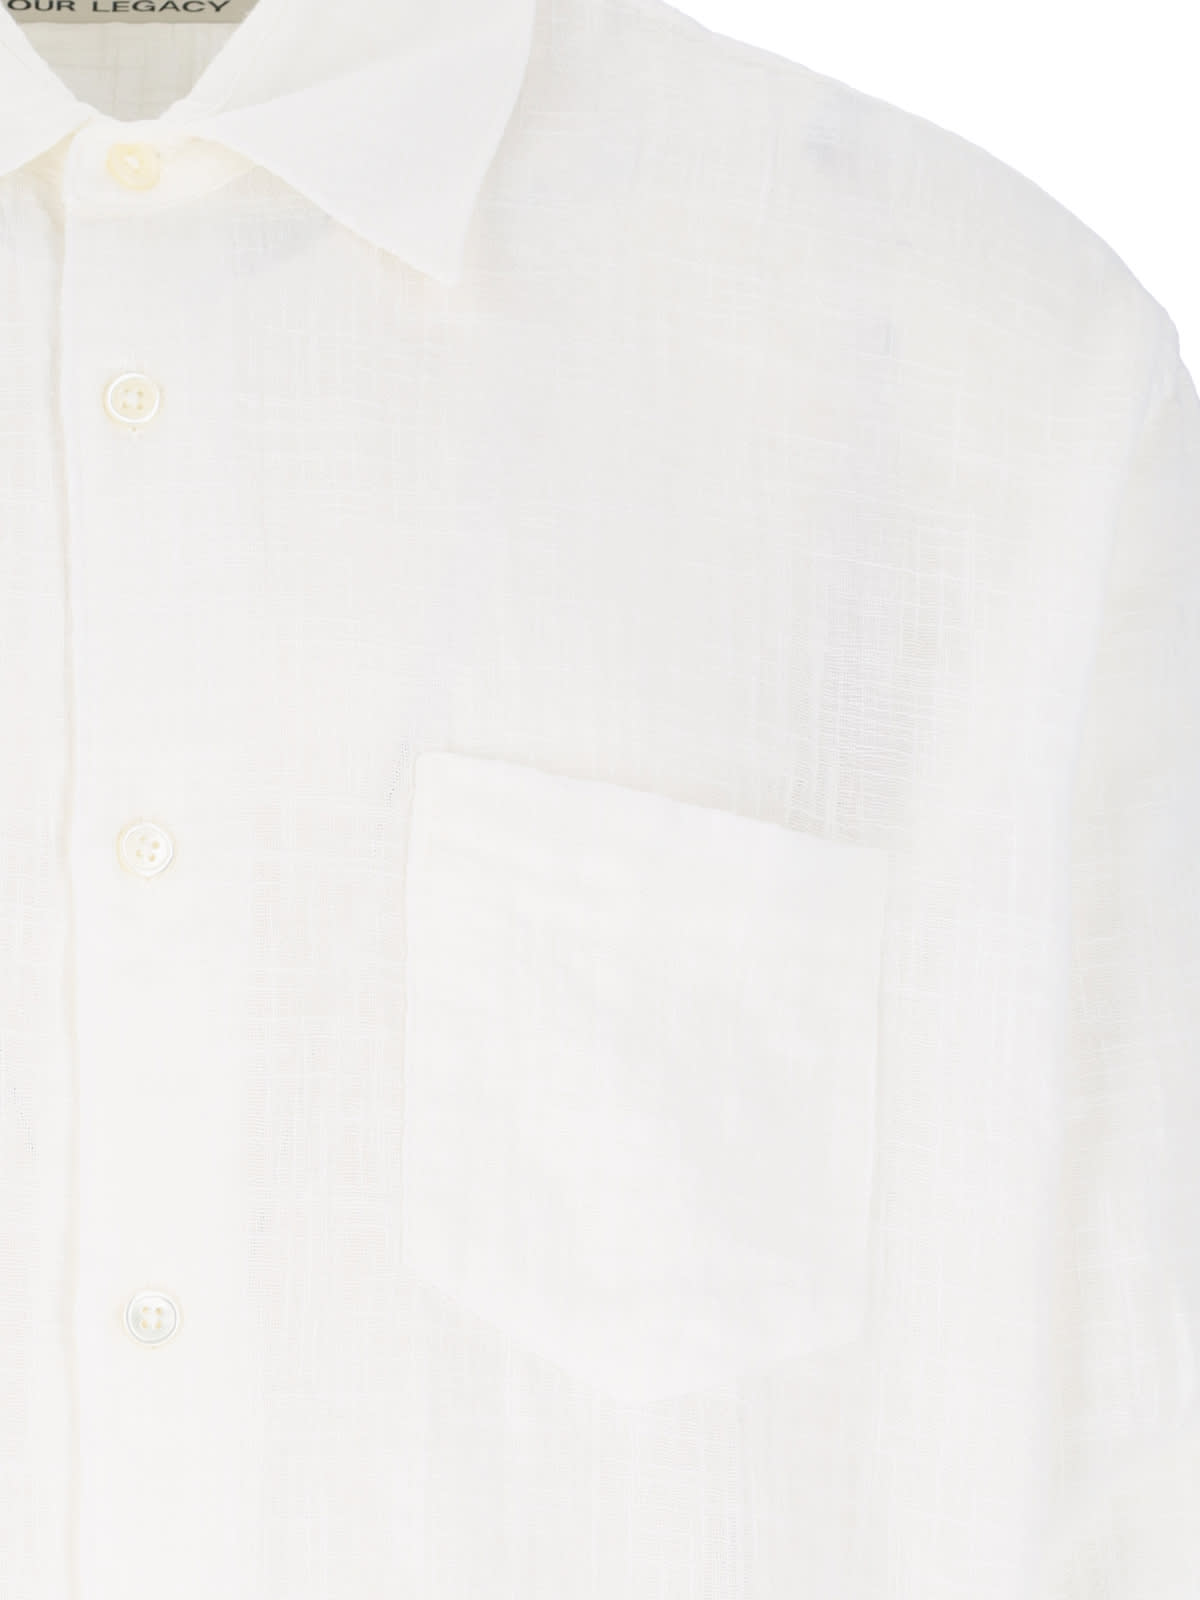 Shop Our Legacy Pocket Shirt In White